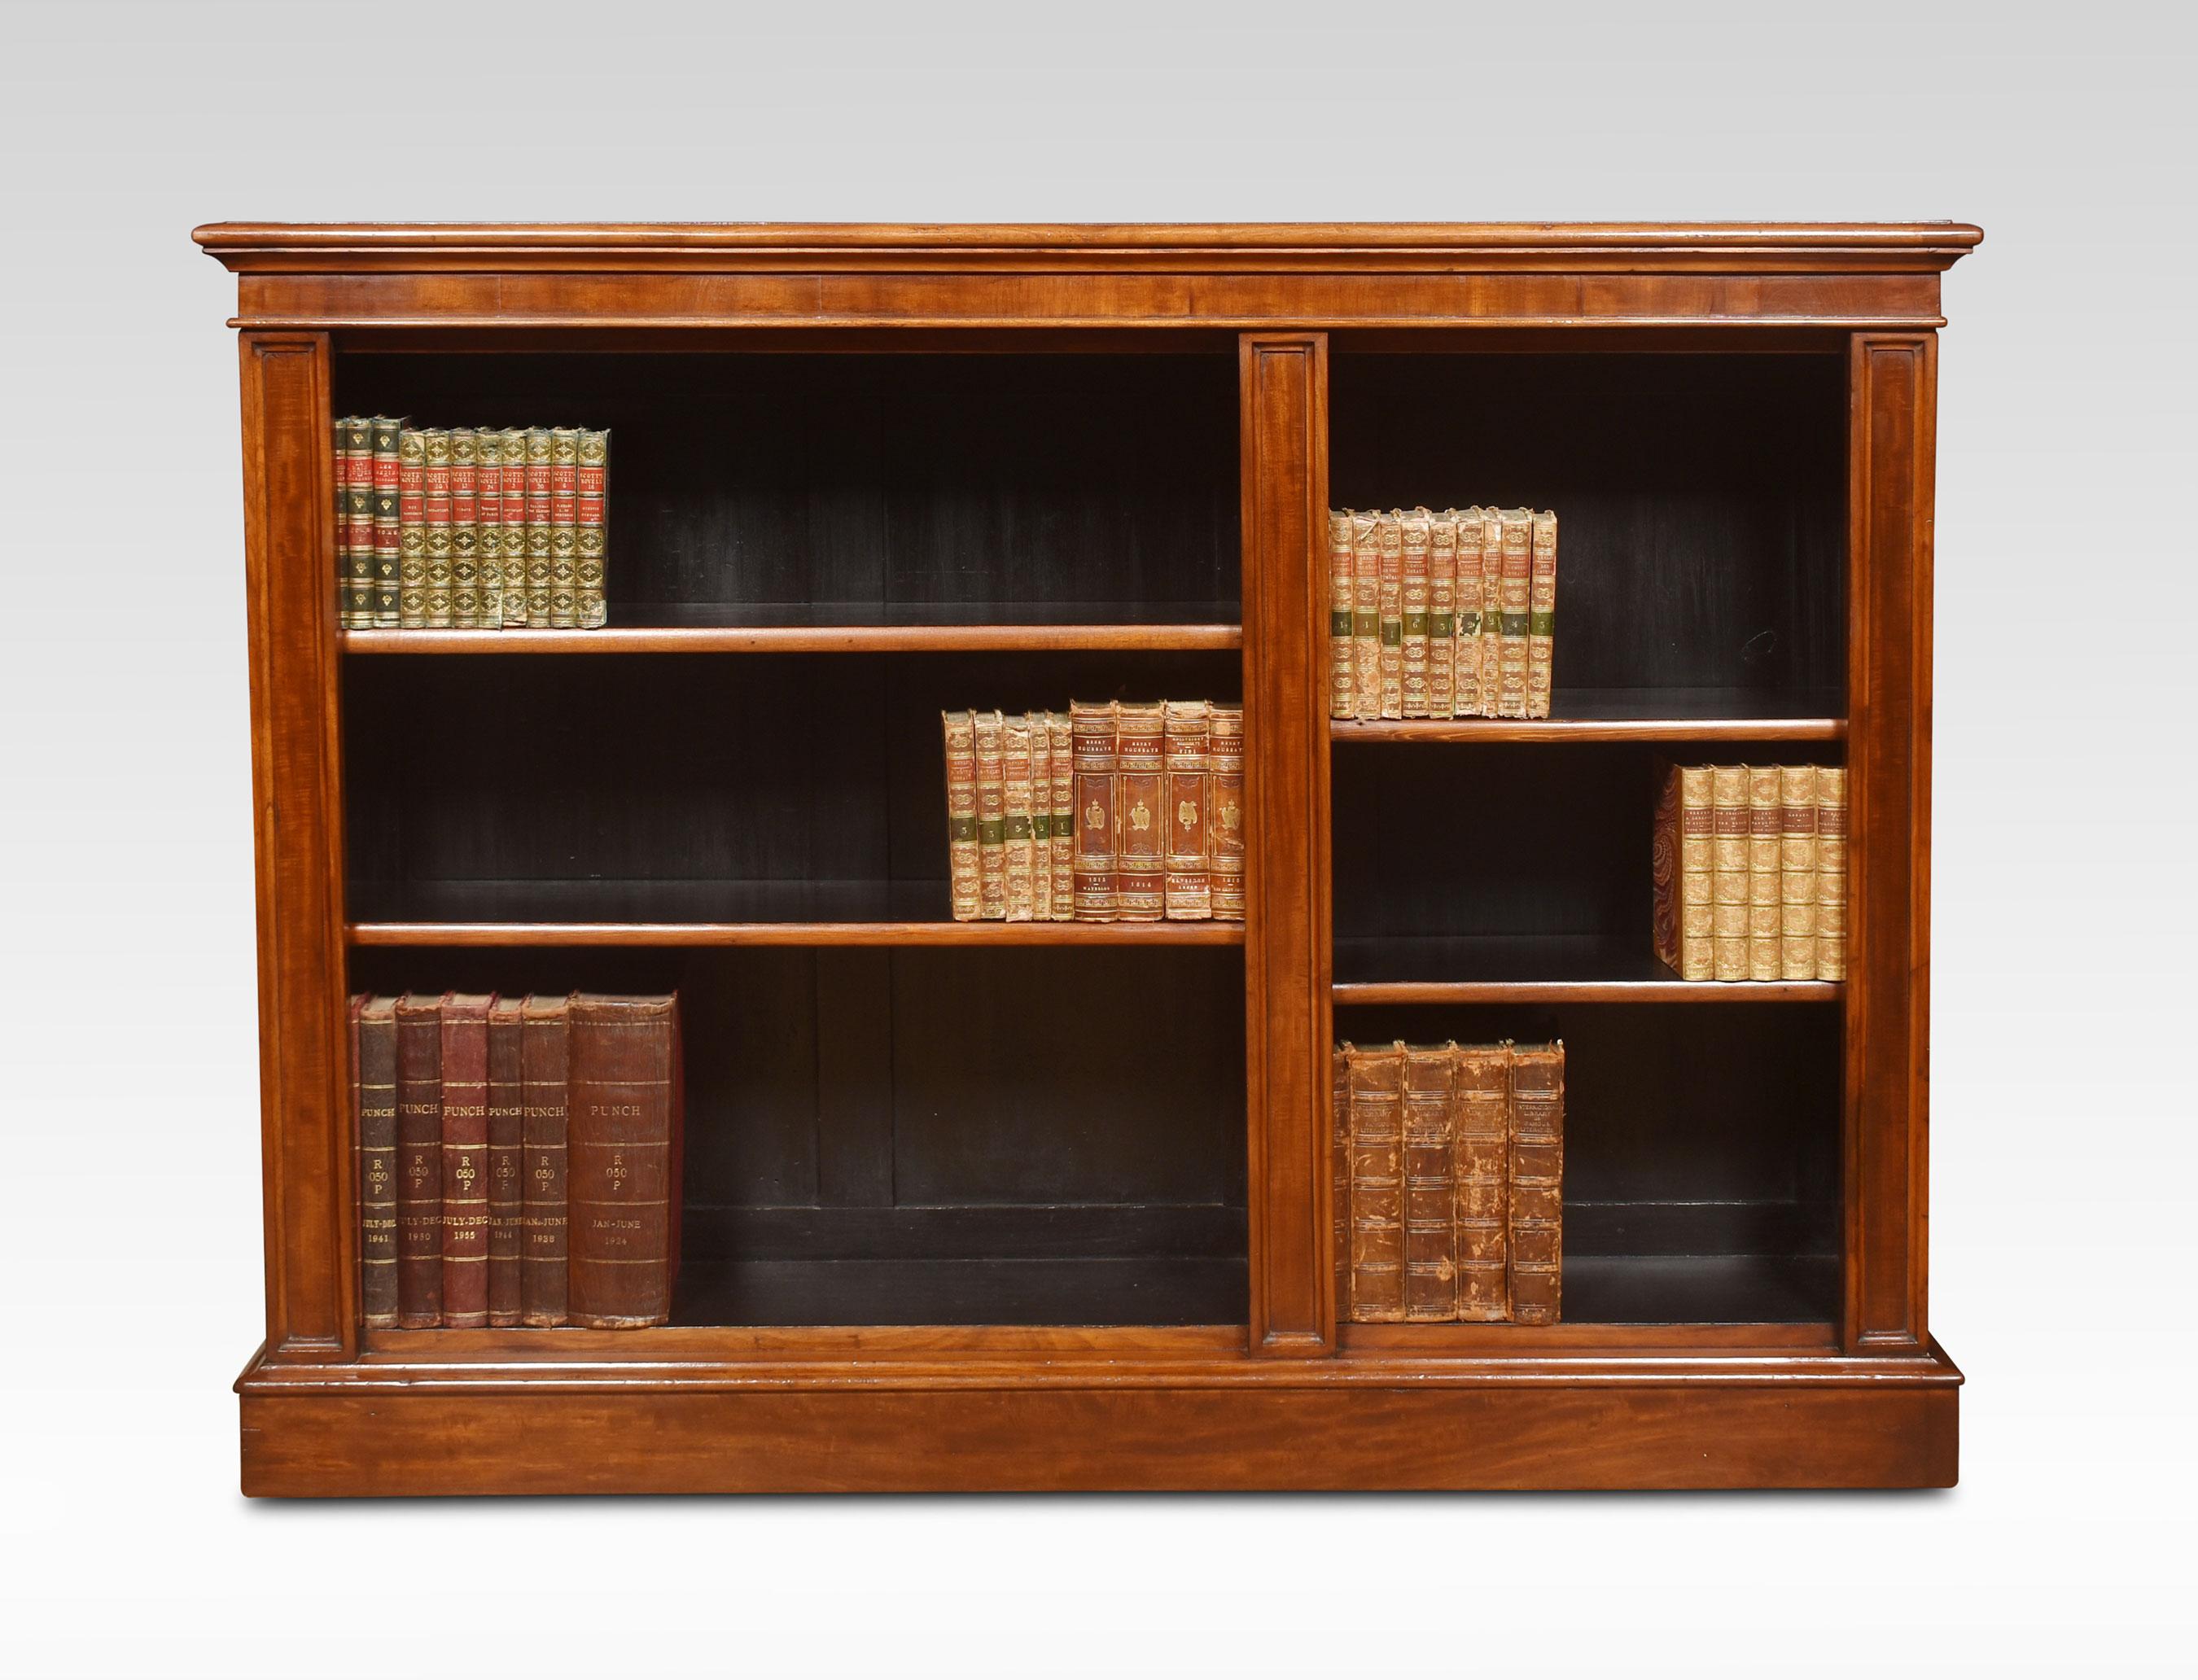 Mahogany open bookcase, the large rectangular top. Above two bays of adjustable shelves divided by column. All raised up on plinth base.
Dimensions
Height 43.5 Inches
Width 62.5 Inches
Depth 13 Inches